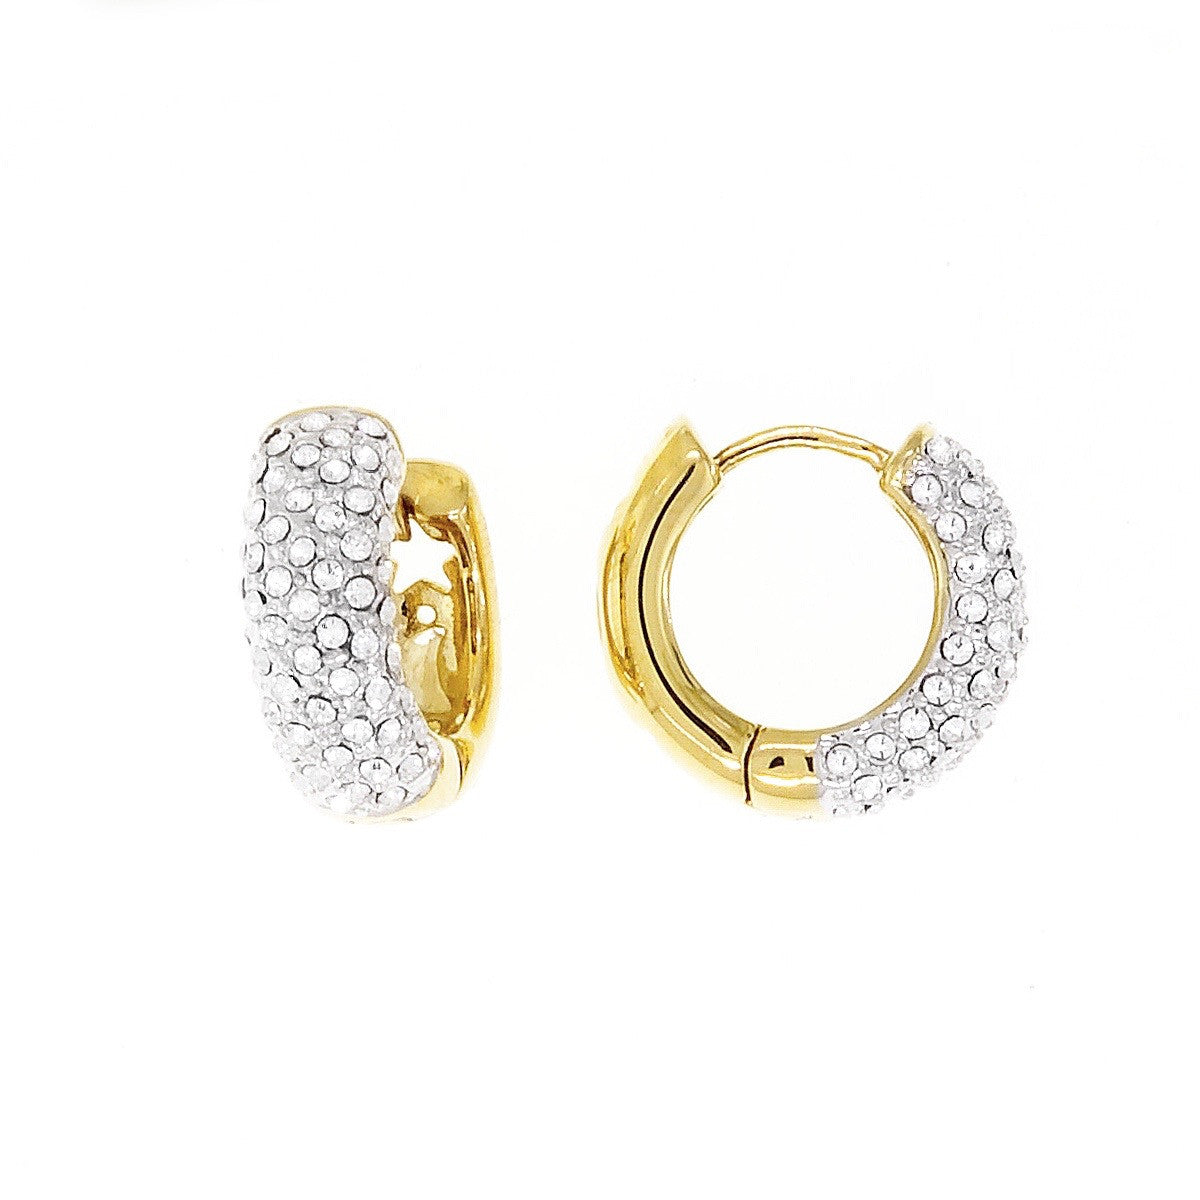 Clear Swarovski Crystal Huggie Earring with Gold Hoop by Bobby Schandra